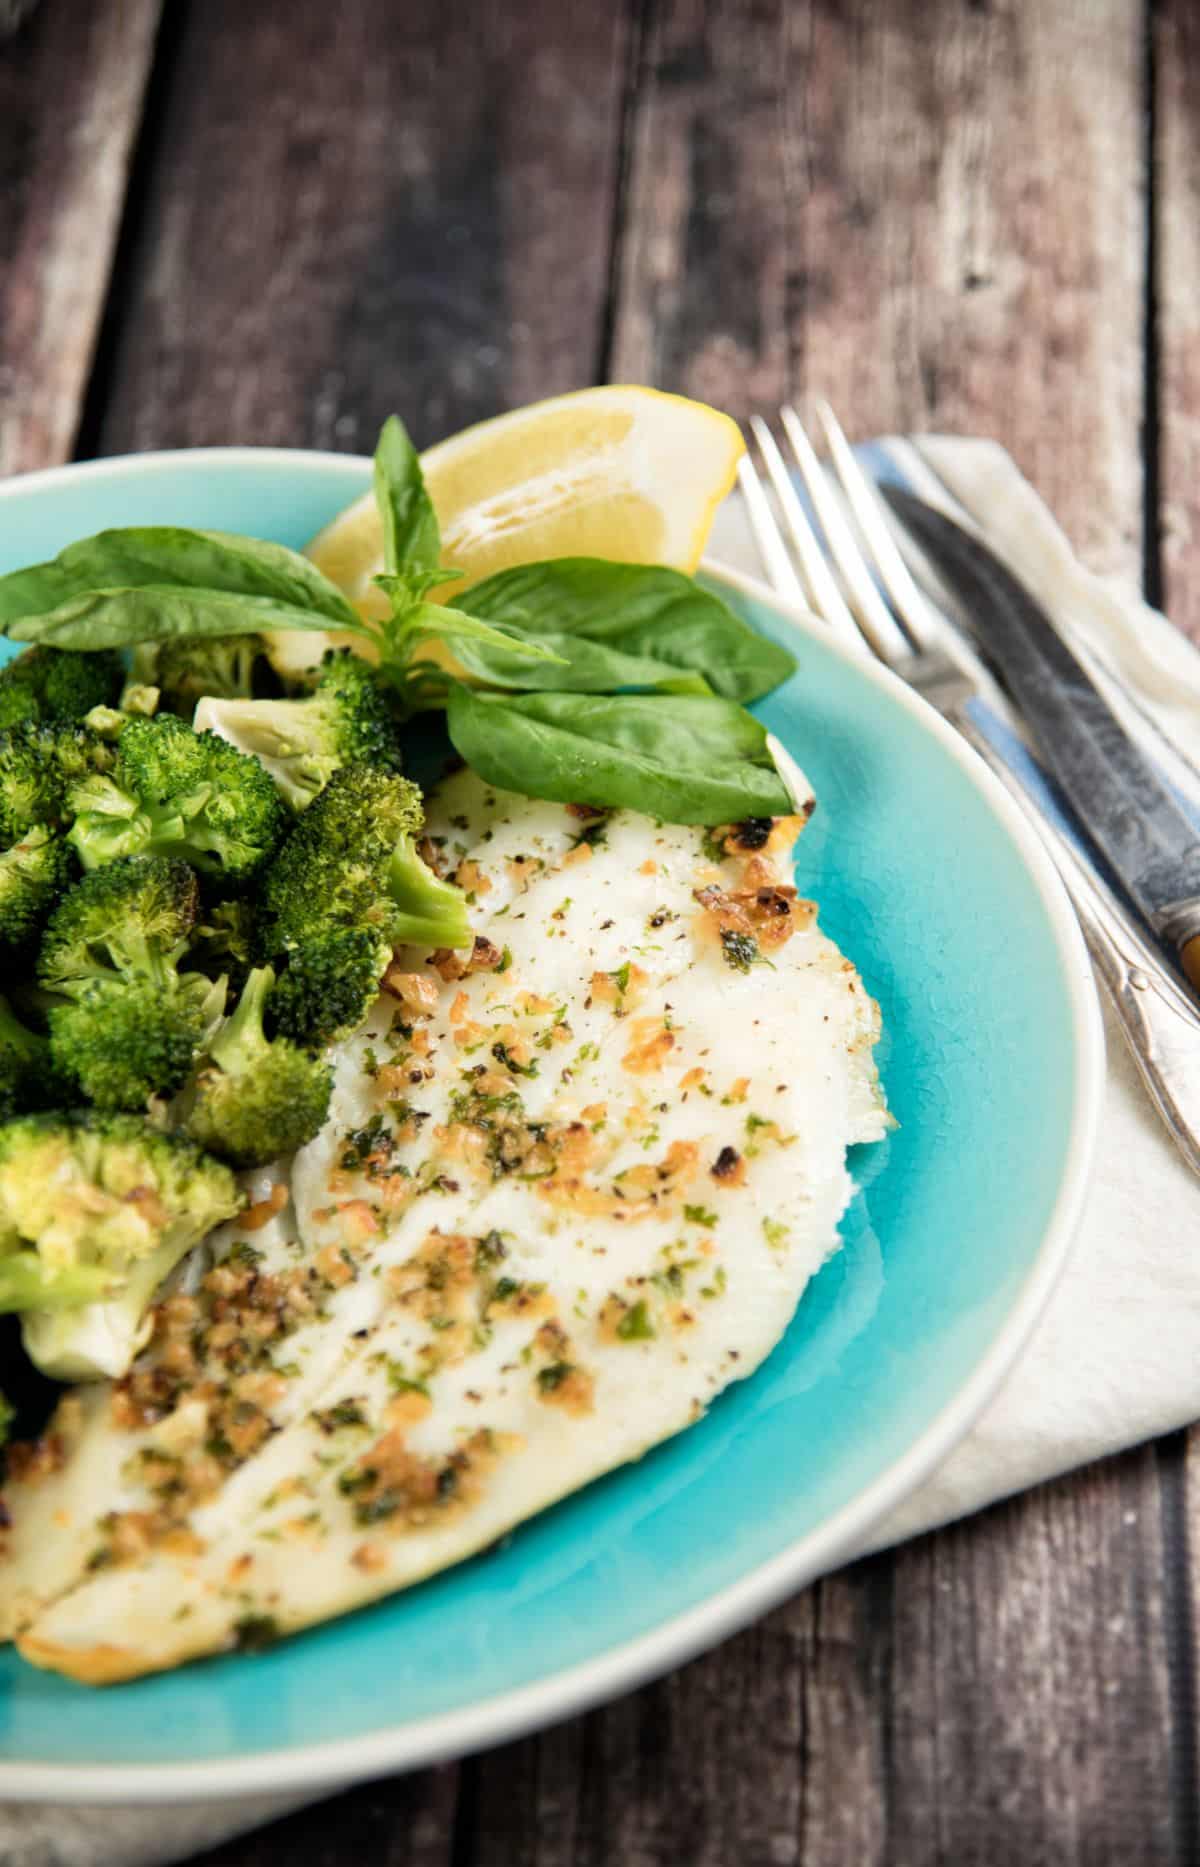 Broiled Halibut with Broccoli and Toasted Garlic on a blue plate.